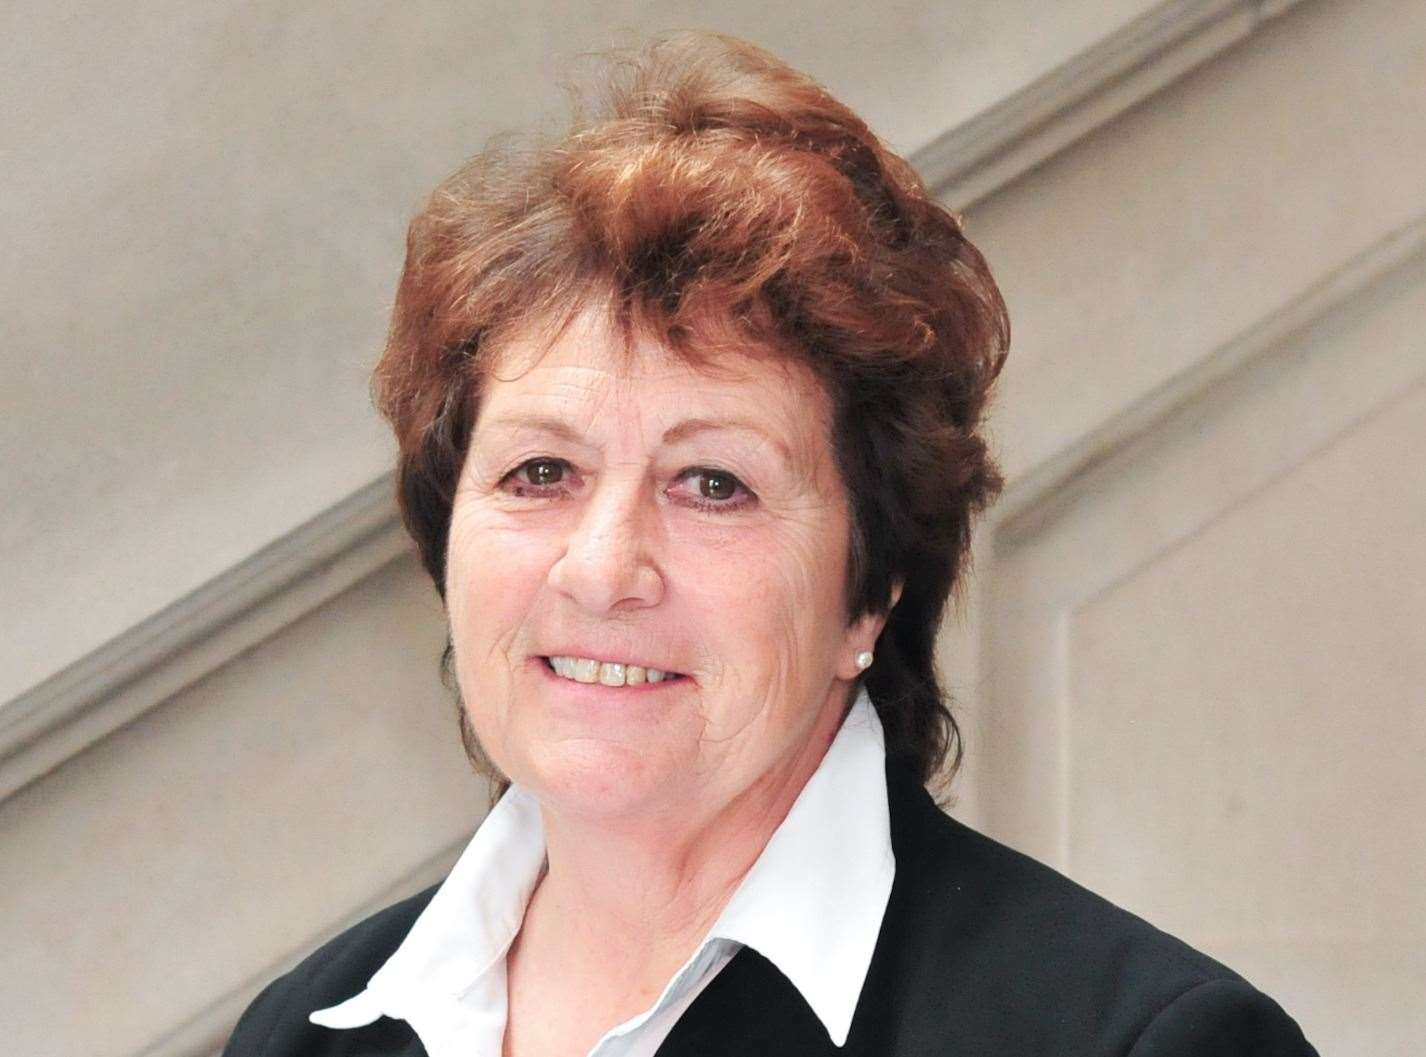 Cllr Rosalind Binks (Con) who represents Broadstairs on Kent County Council